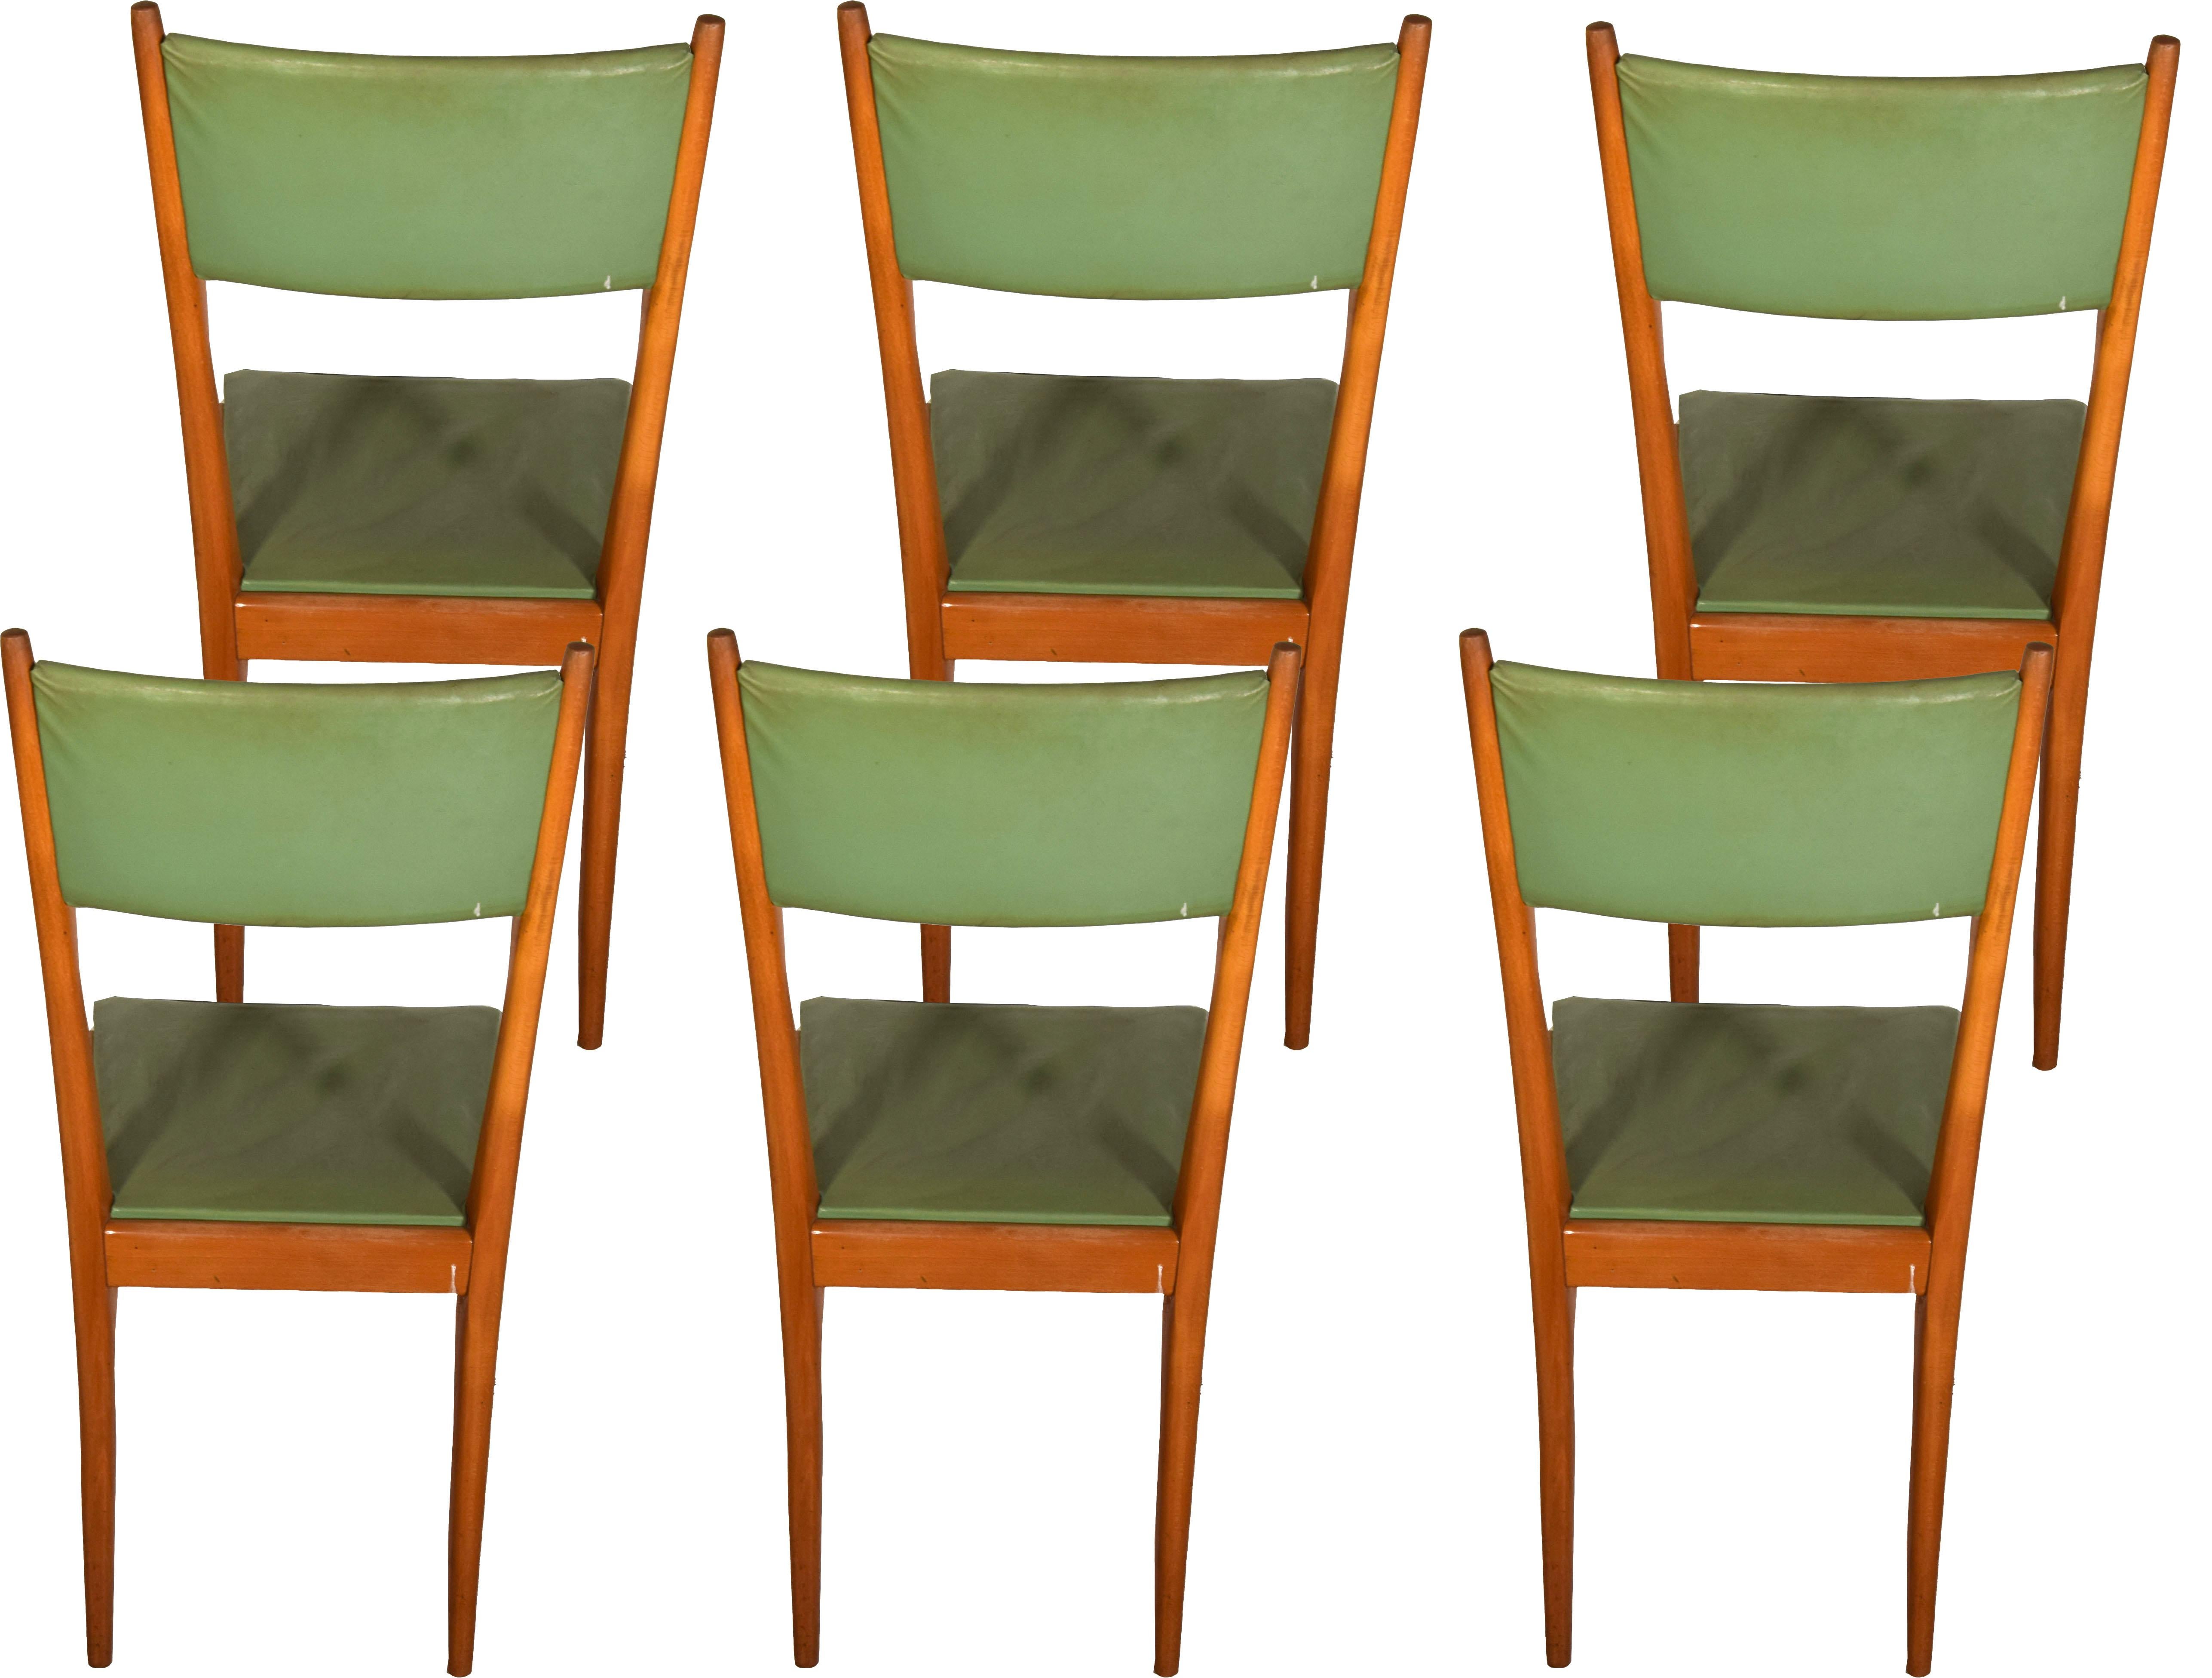 Italian Set of Six Vintage Green Chairs, Italy, 1950s